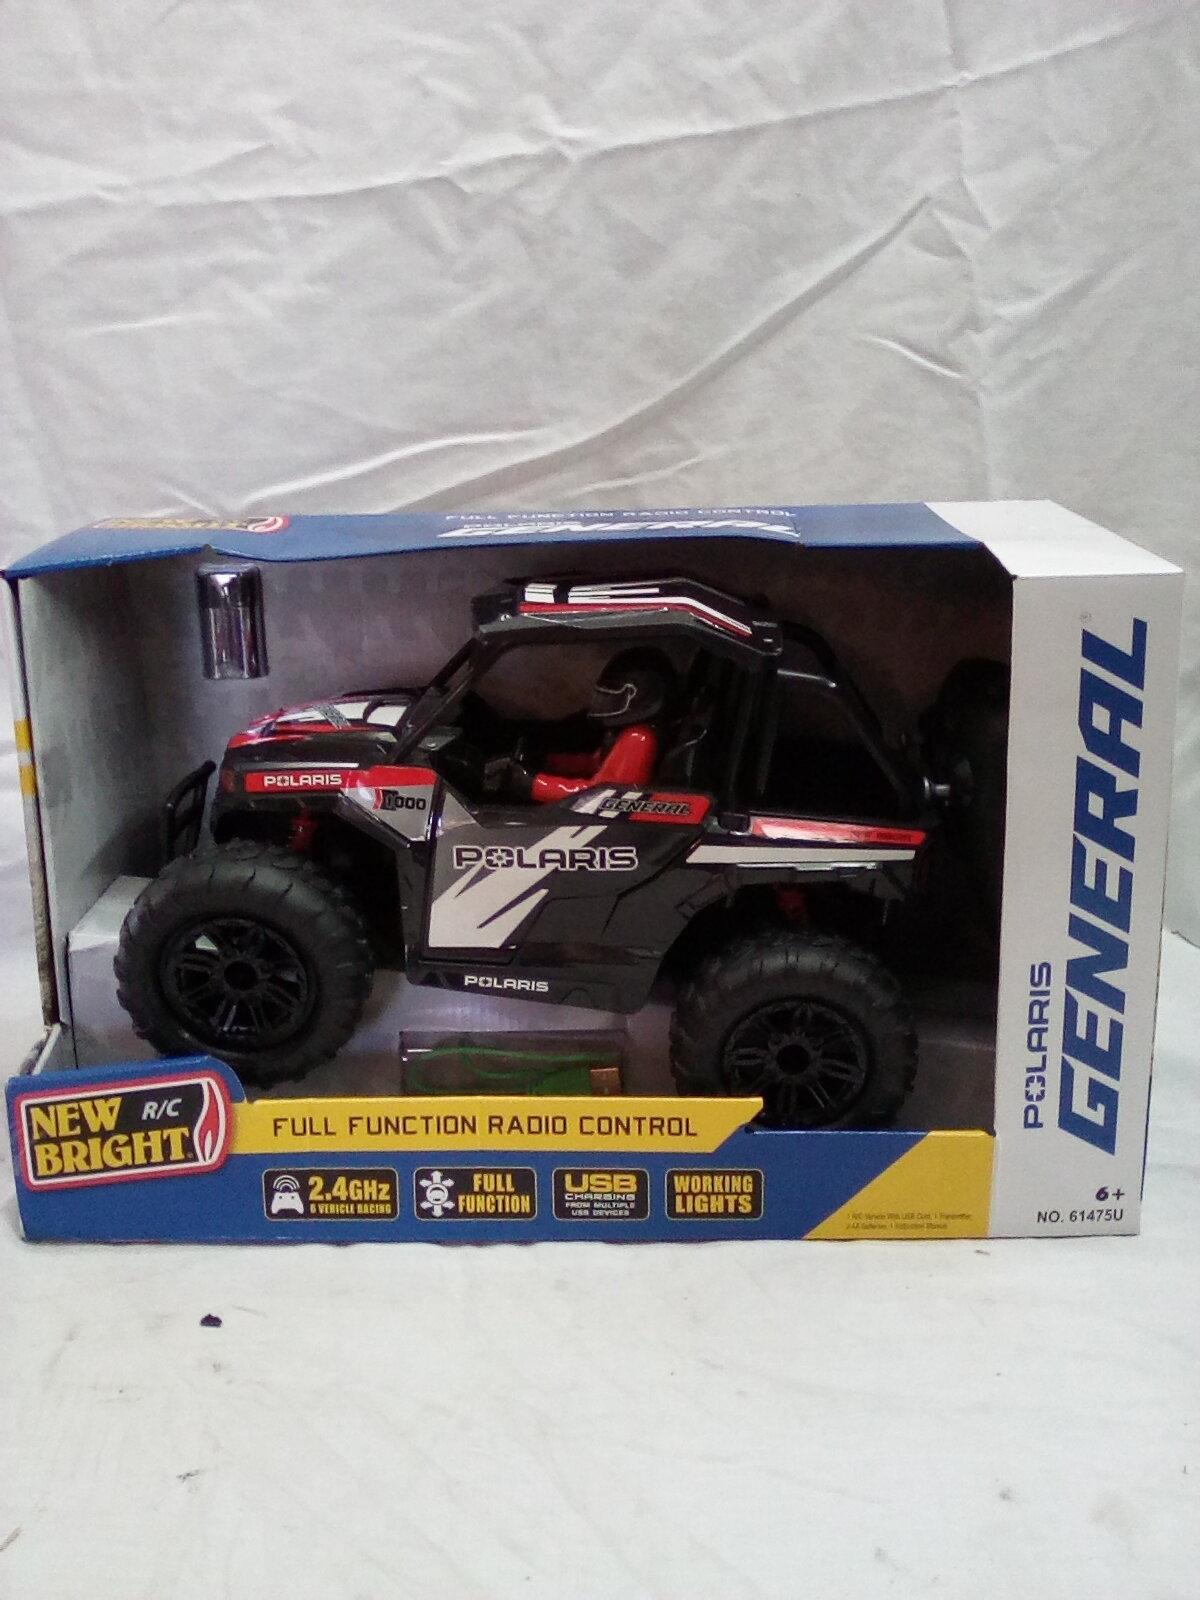 Polaris General New Bright R/C Fully Functional Ages 6+